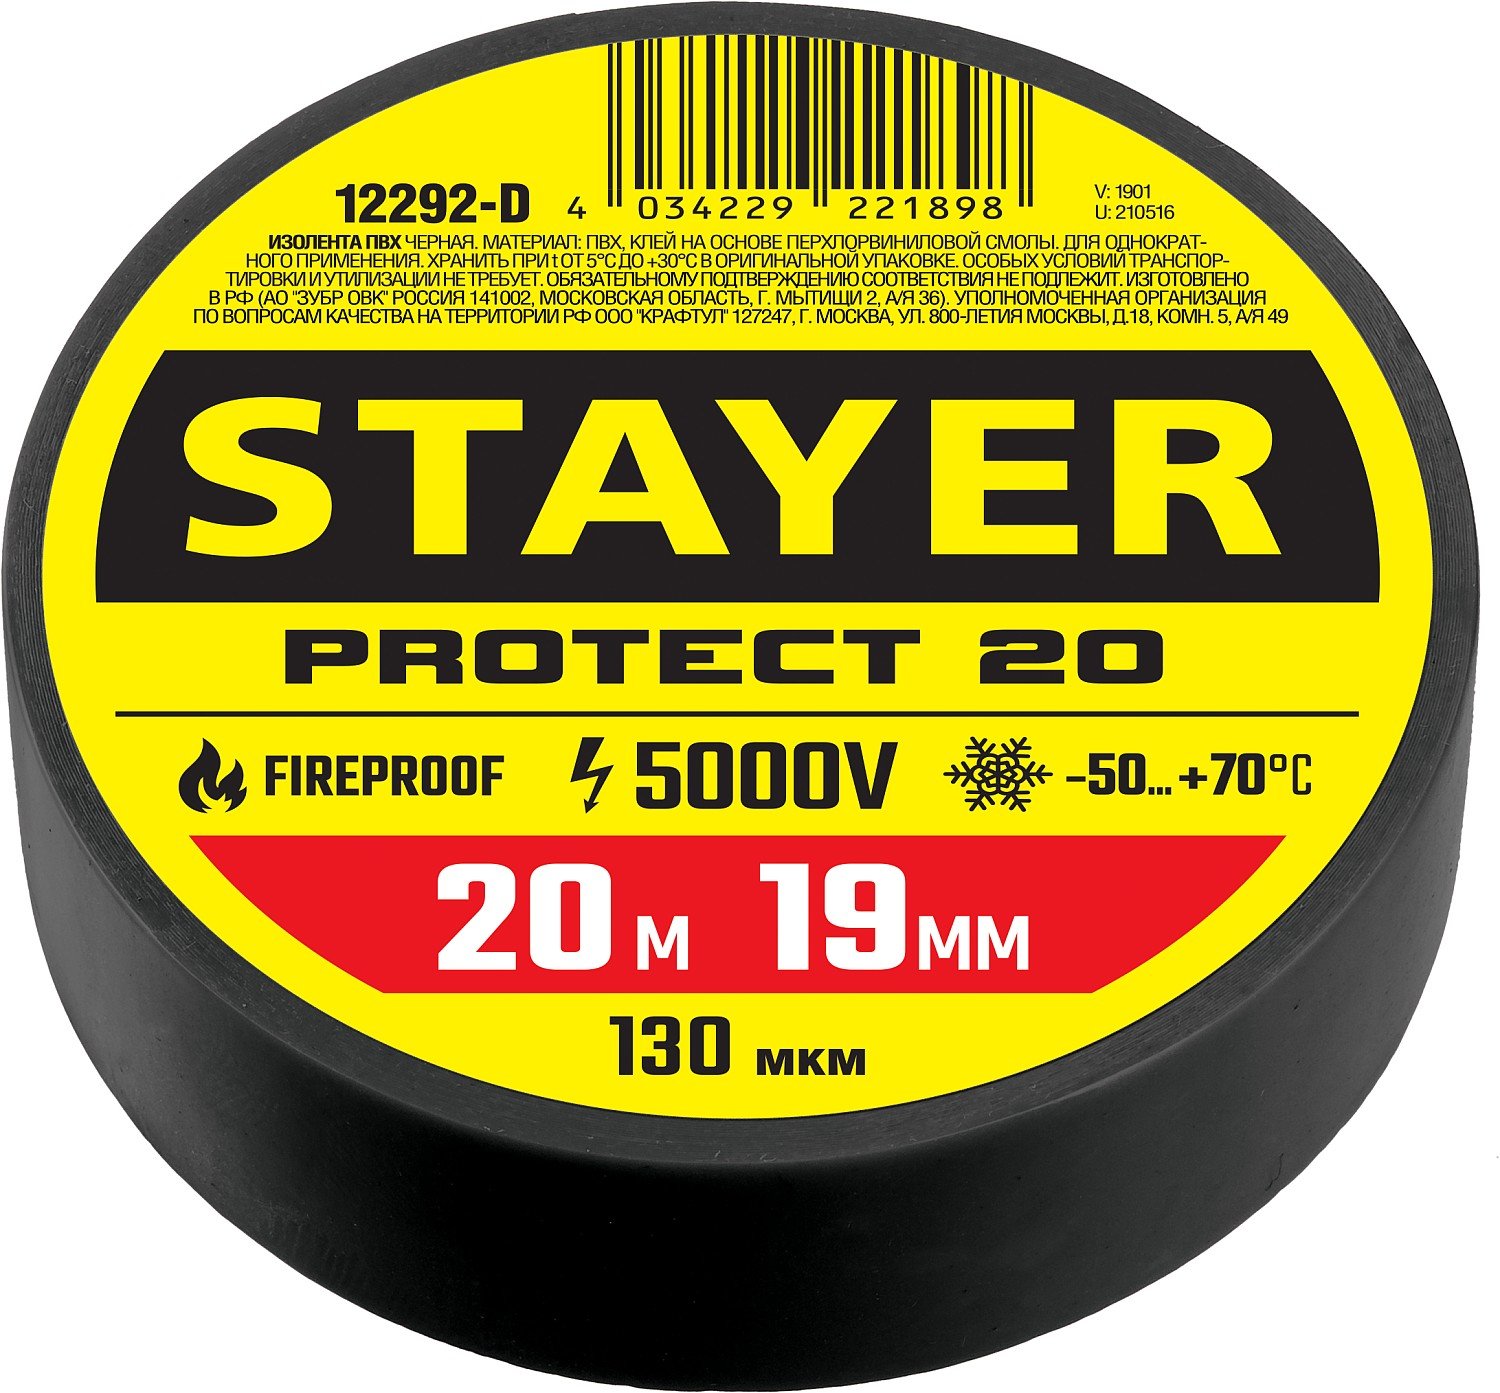    STAYER Protect-20 19   20   (12292-D)